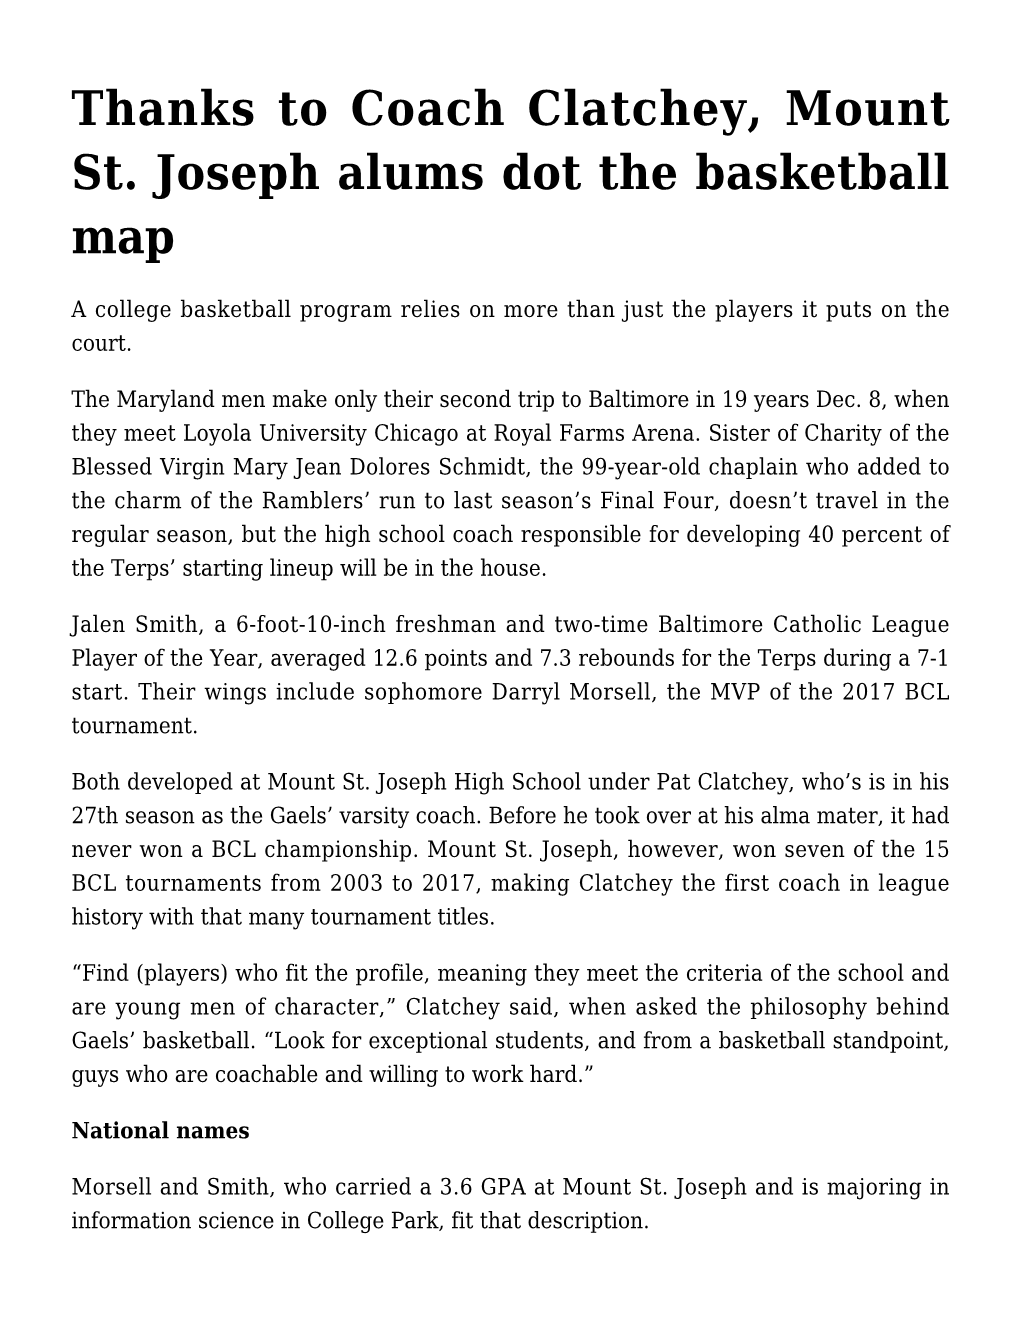 Thanks to Coach Clatchey, Mount St. Joseph Alums Dot the Basketball Map